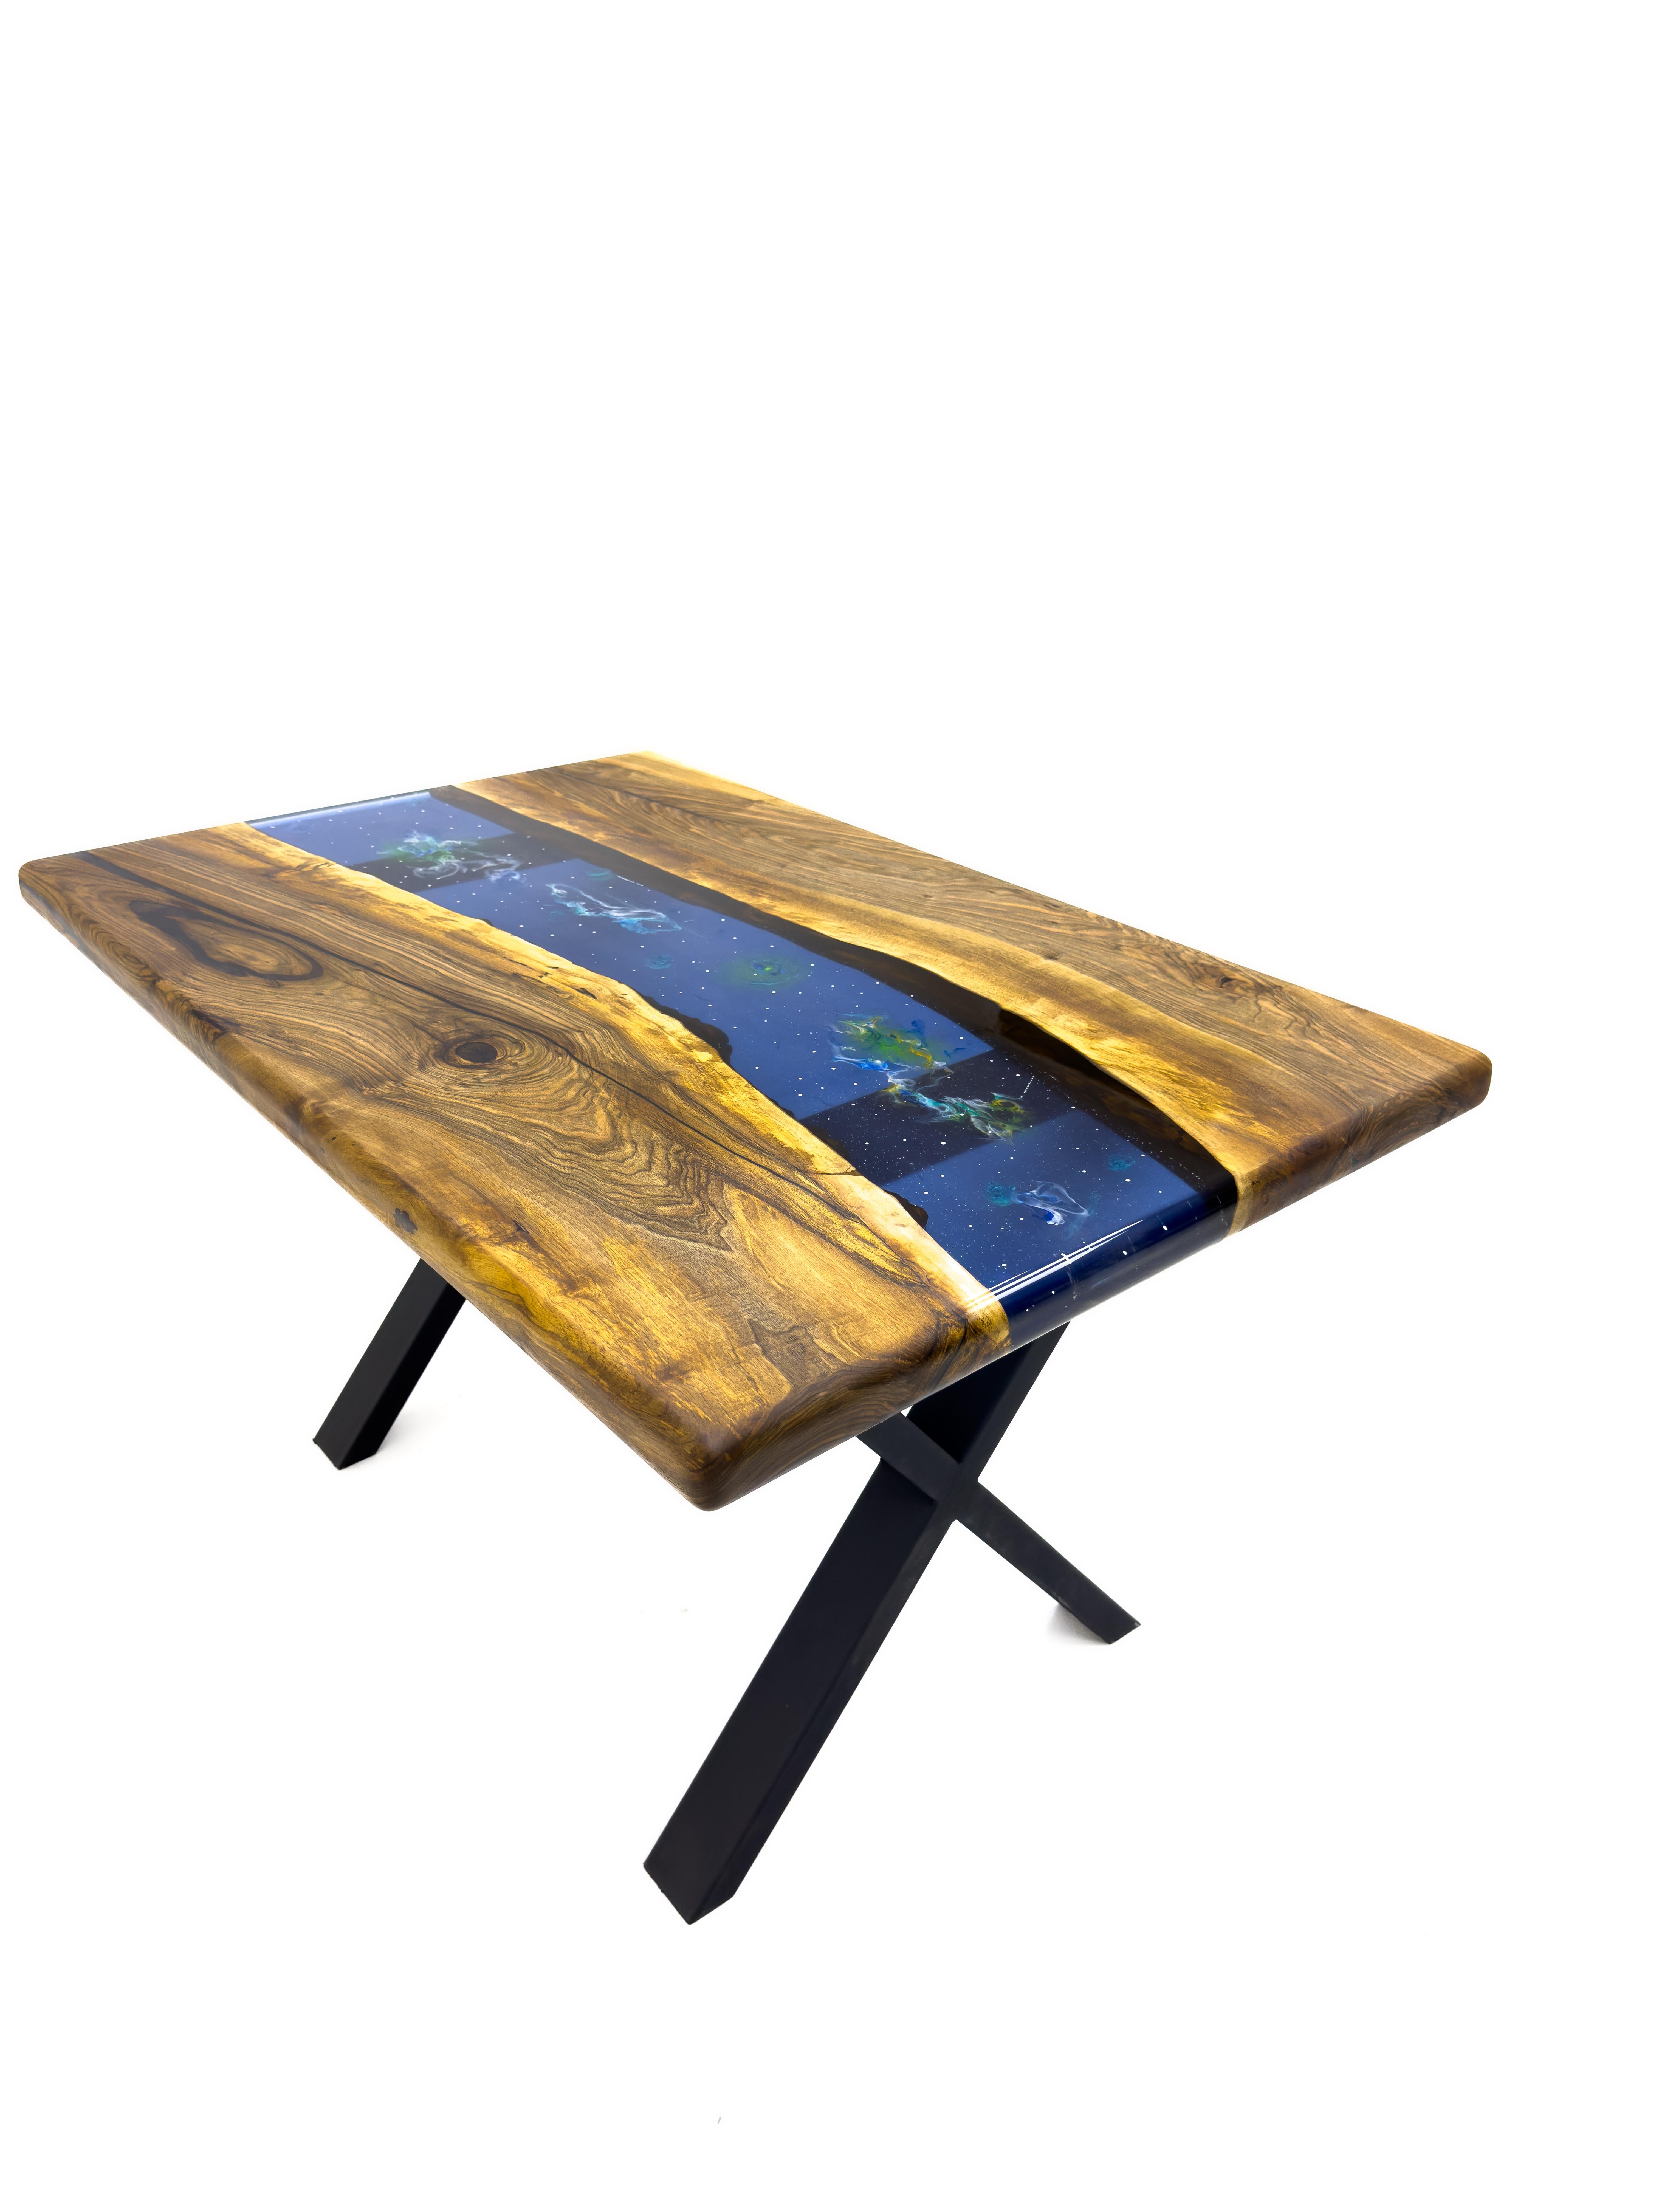 Turkish Space Design Epoxy Resin Dining Table X Base For Sale